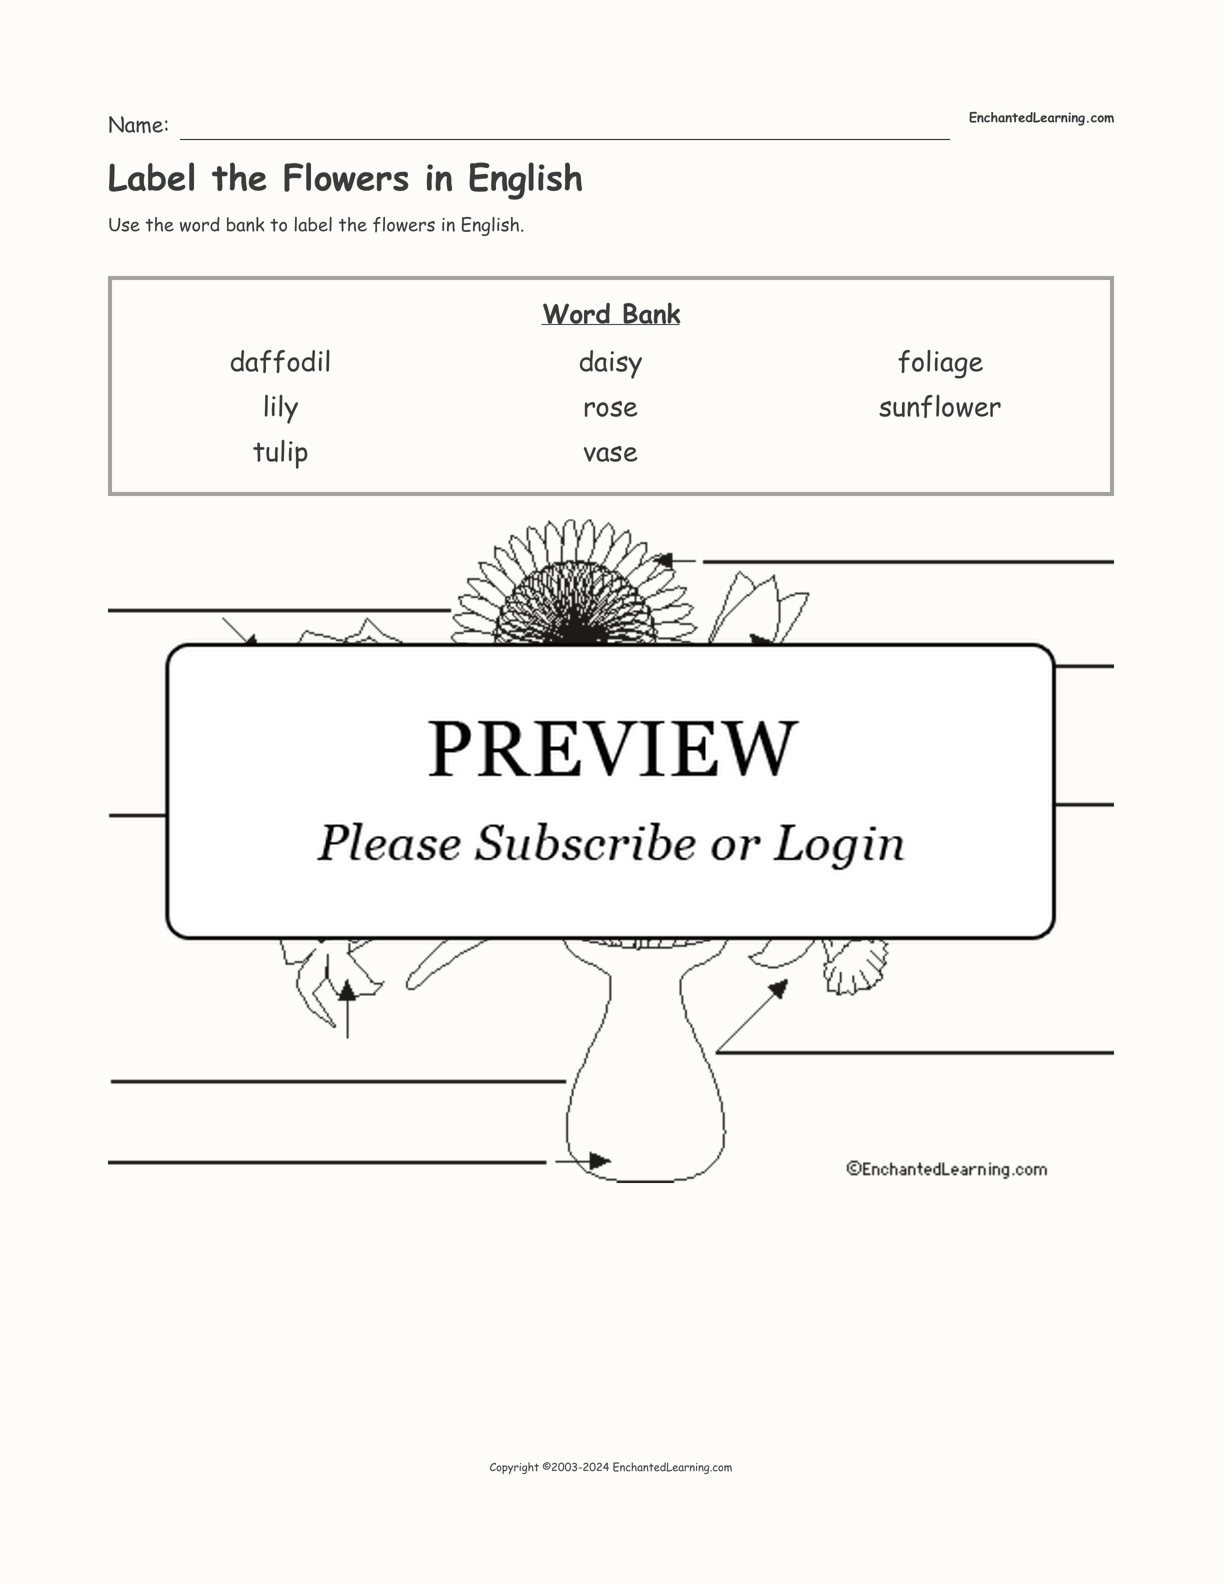 Label the Flowers in English interactive worksheet page 1